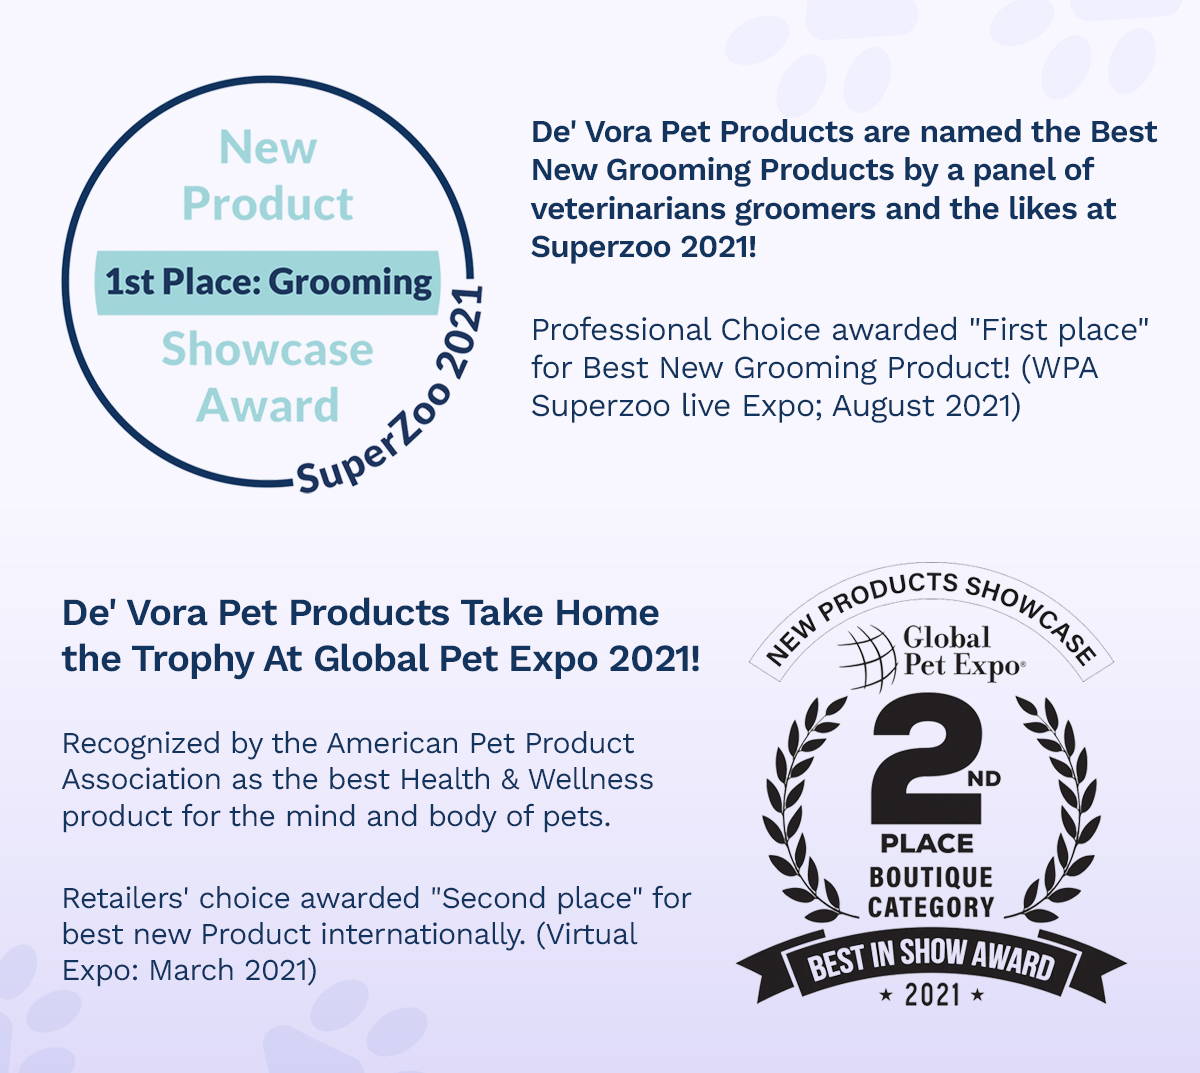 De'Vora Pet Products are named the Best New Grooming Products by a panel of veterinarians groomers and the likes at Superzoo 2021! Professional Choice awarded "First place" for Best New Grooming Product! (WPA Superzoo live Expo; August 2021), De' Vora Pet Products Take Home the Trophy At Global Pet Expo 2021! Recognized by the American Pet Product Association as the best Health & Wellness product for the mind and body of pets.   Retailers' choice awarded "Second place" for best New Product Internationally. (Virtual Expo; March 2021)